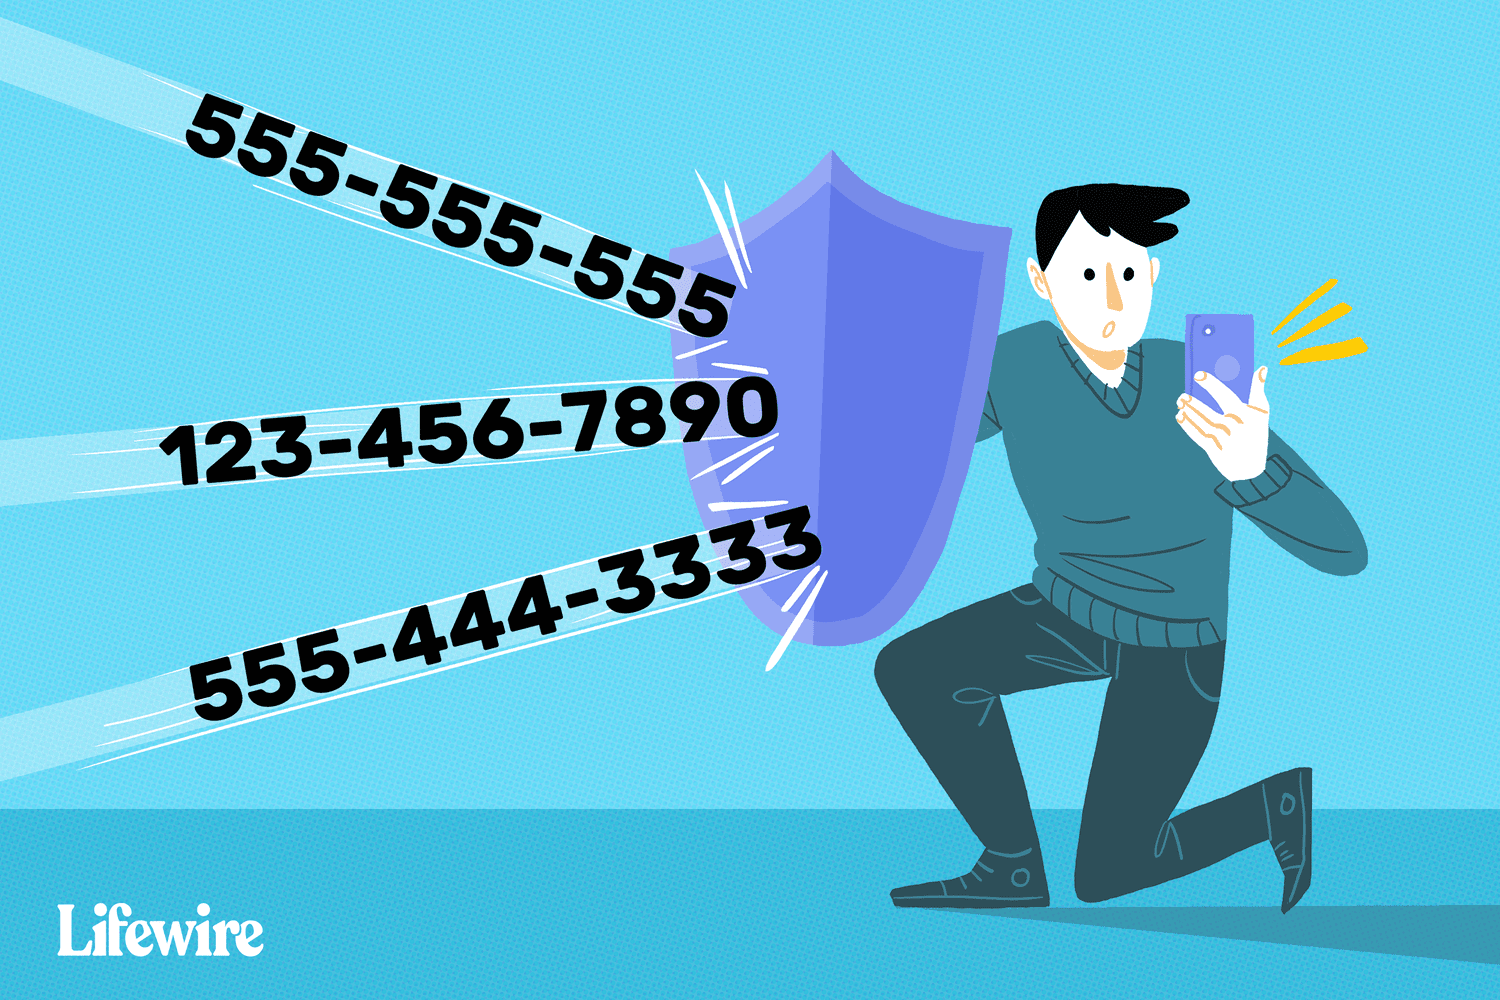 how to block your cell phone number from caller id 577580 38ebdf4b47924459b2bbb307de0bac75